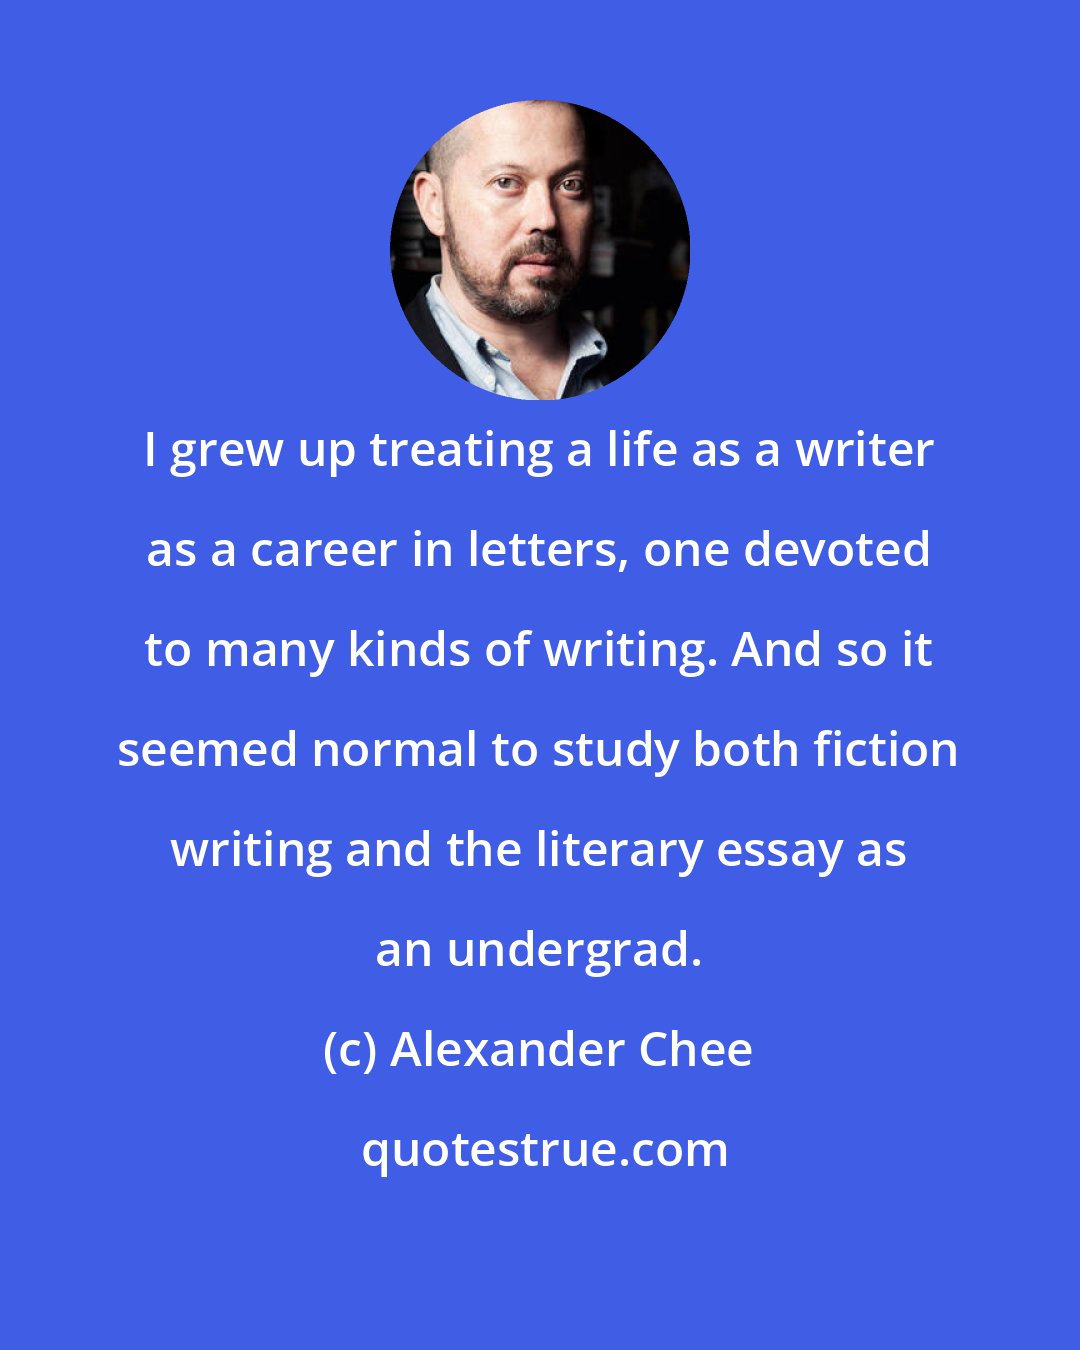 Alexander Chee: I grew up treating a life as a writer as a career in letters, one devoted to many kinds of writing. And so it seemed normal to study both fiction writing and the literary essay as an undergrad.